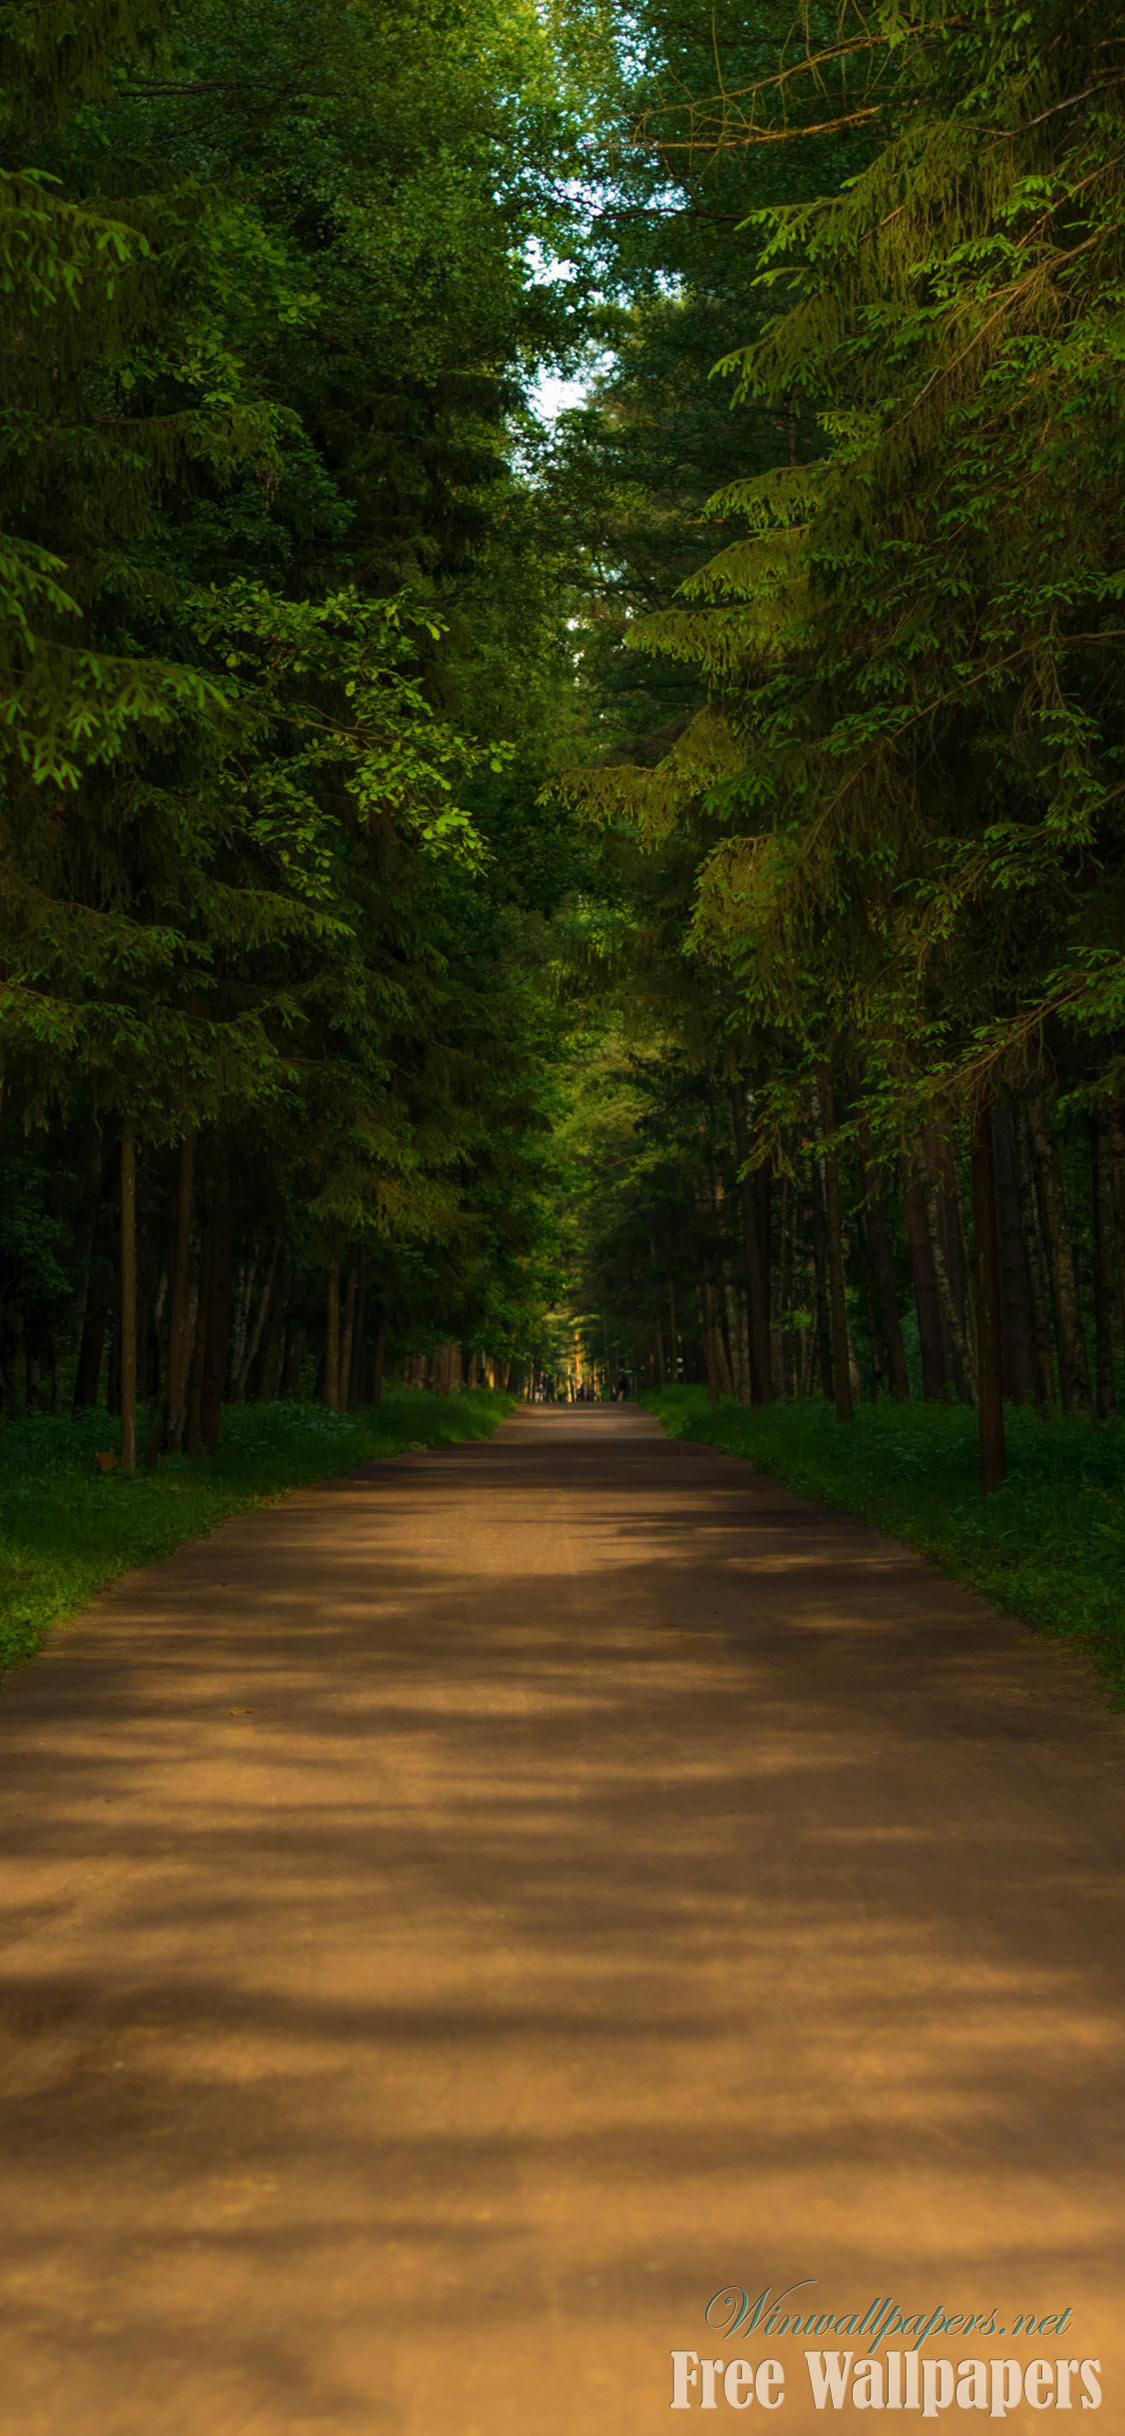 Forest Road Wallpaper For Iphone X - Iphone X Wallpaper Hd , HD Wallpaper & Backgrounds